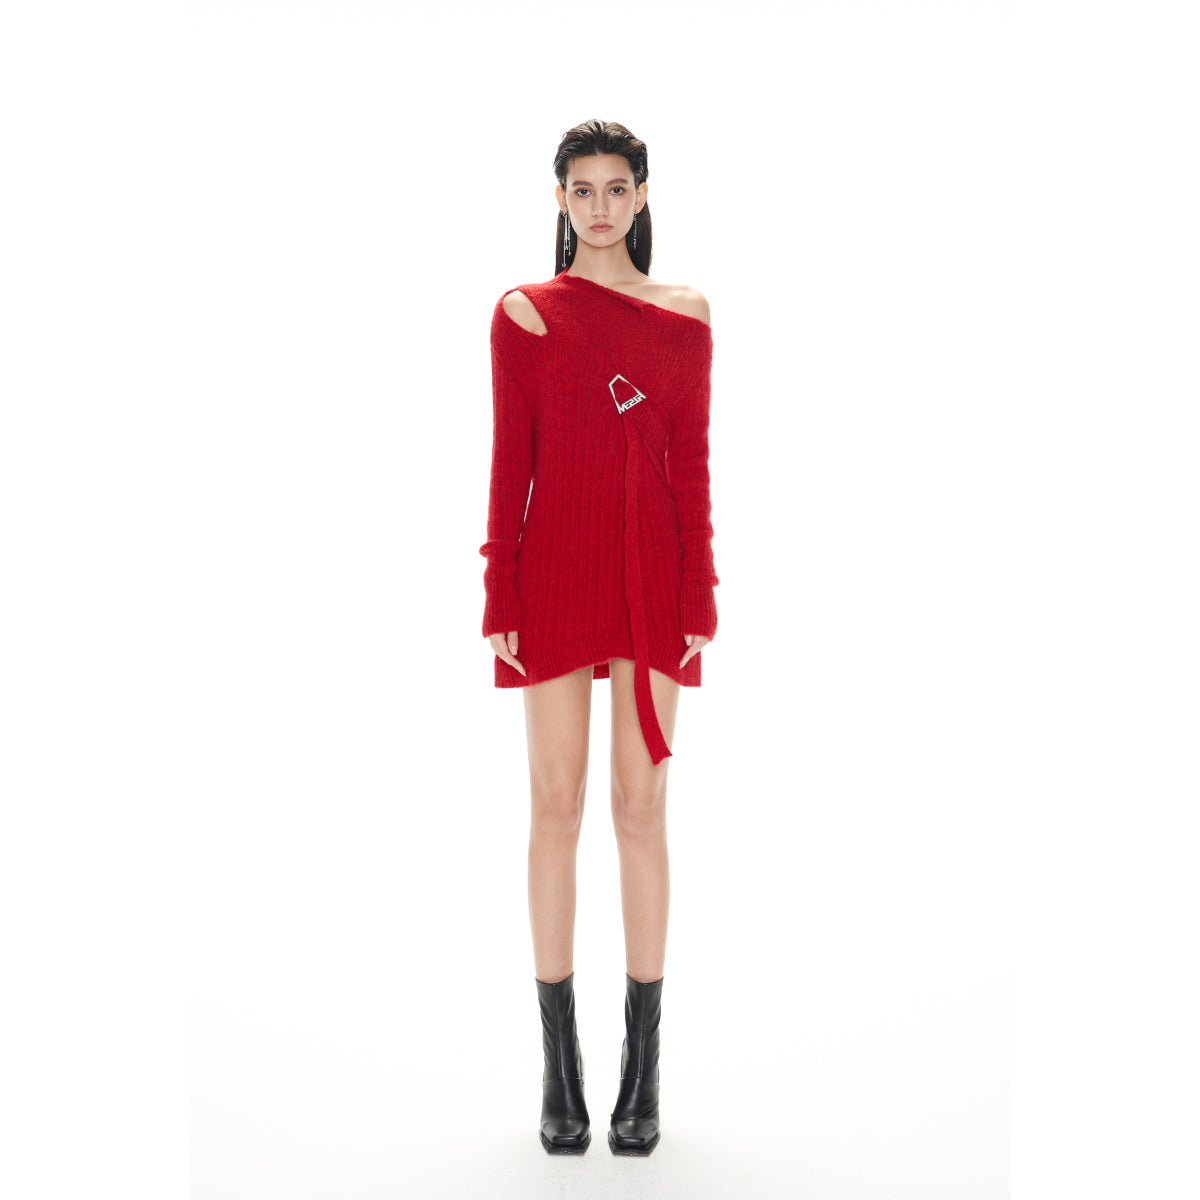 West.Y Hollow Out Buckle Knit Dress Red